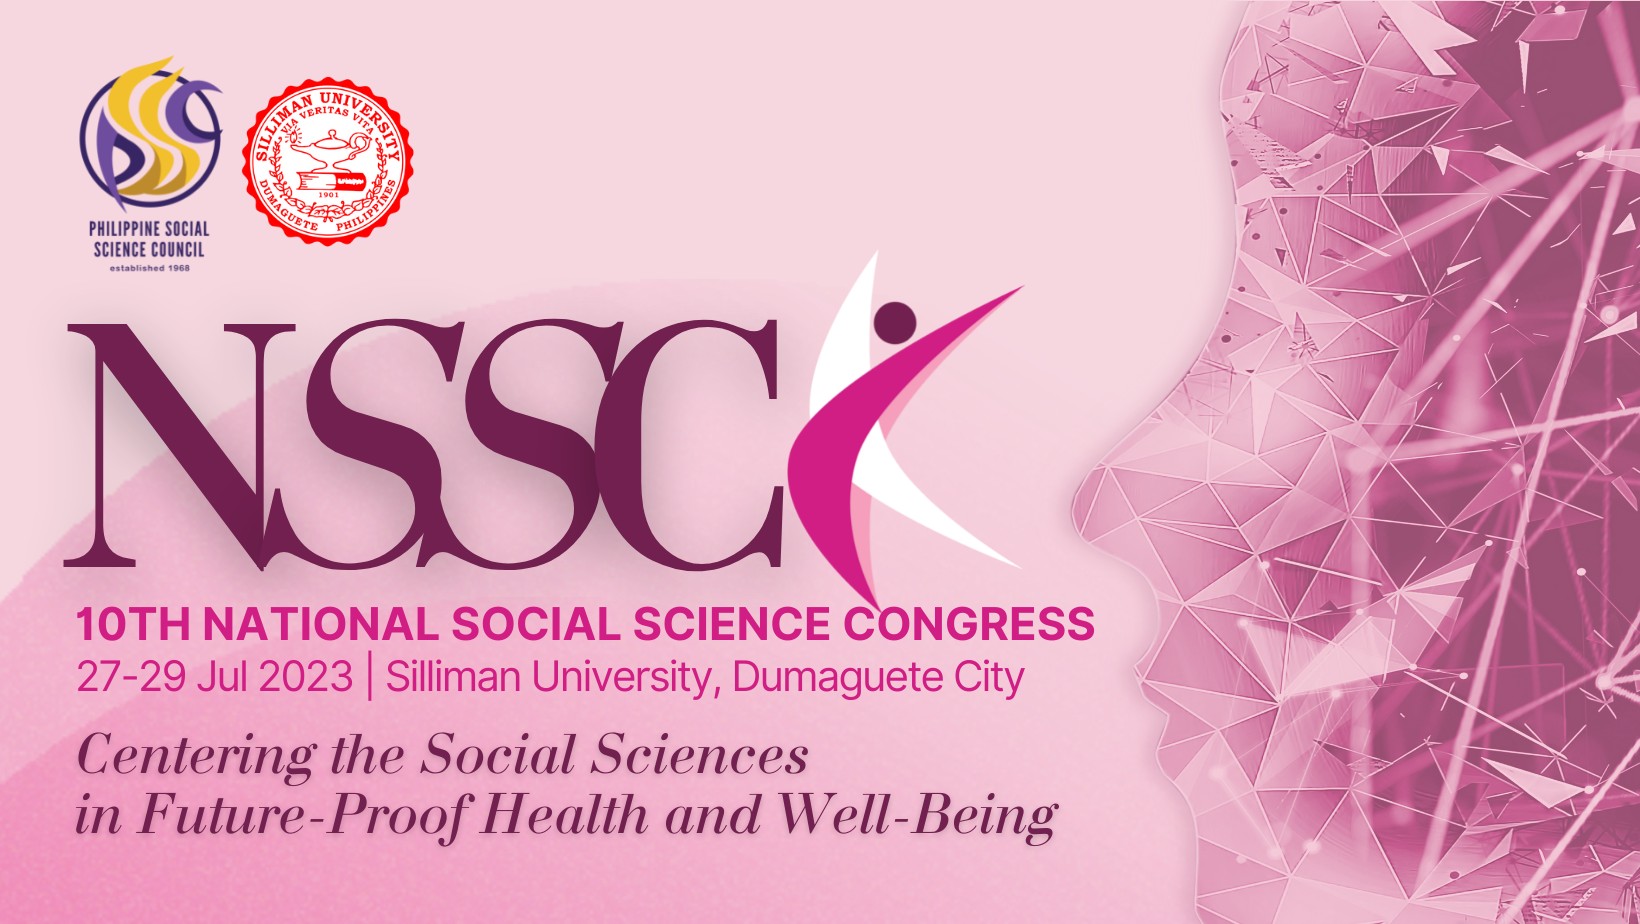 PSSC releases call for papers for 10th National Social Science Congress